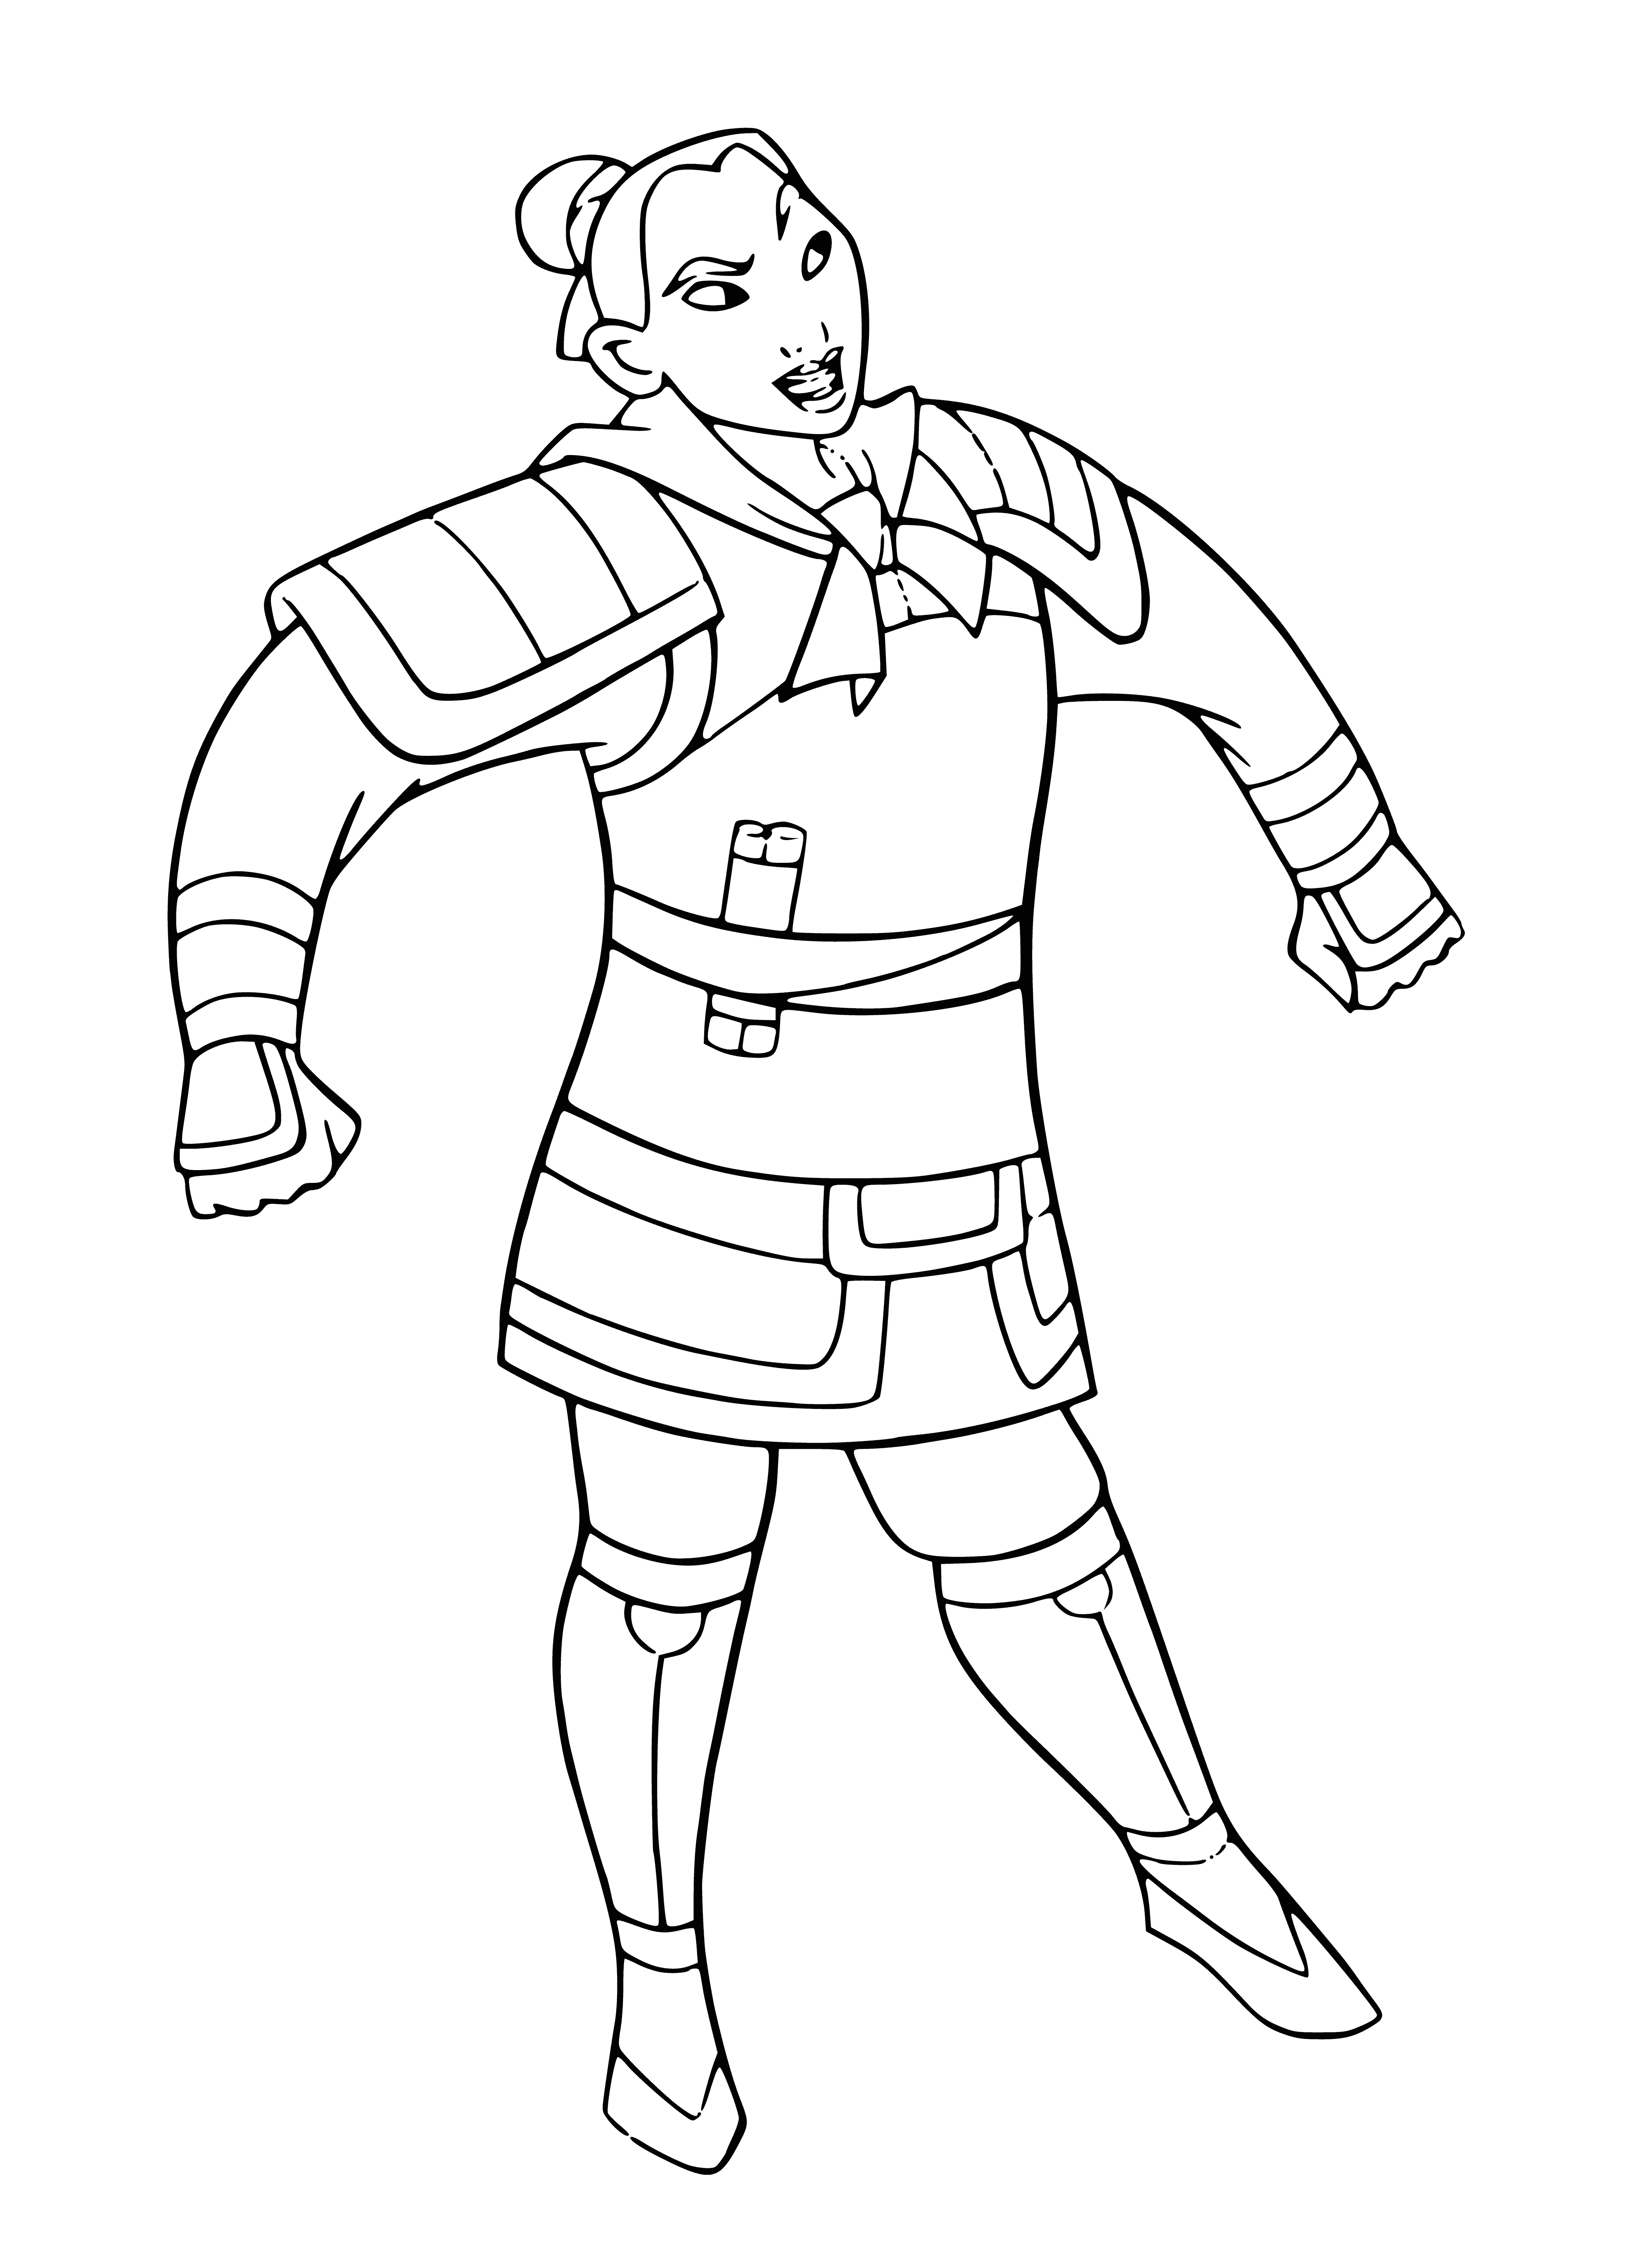 coloring page: Soldier walking through field in green uniform, carrying sword, backpack and canteen.